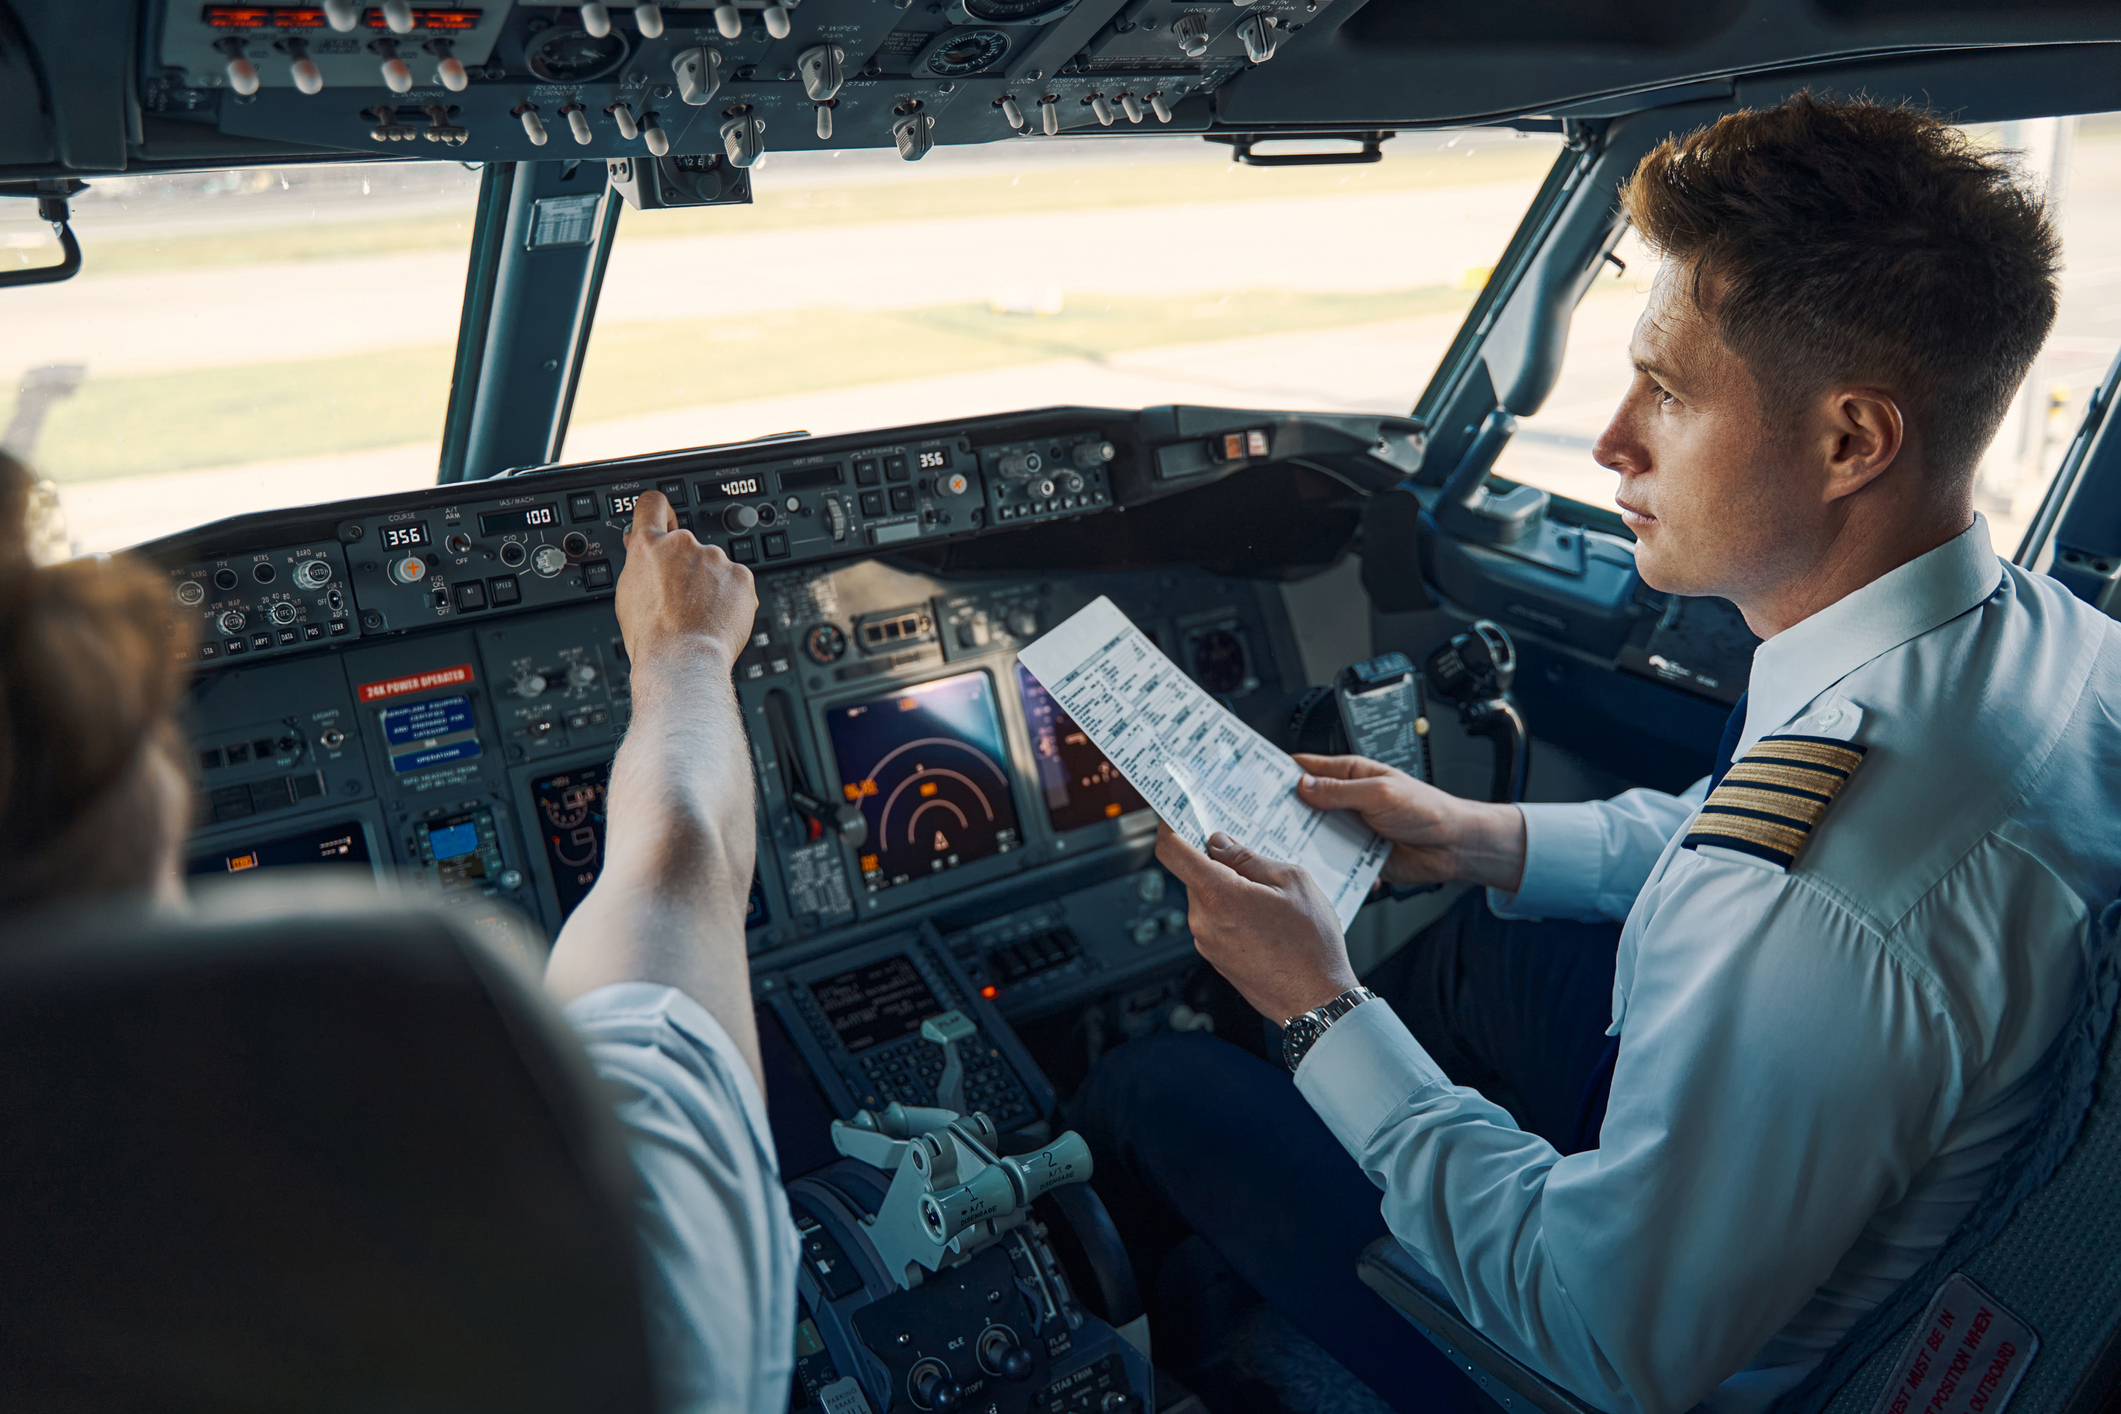 Co-pilot holding a checklist for the flight, sitting next to the chief pilot in the cockpit